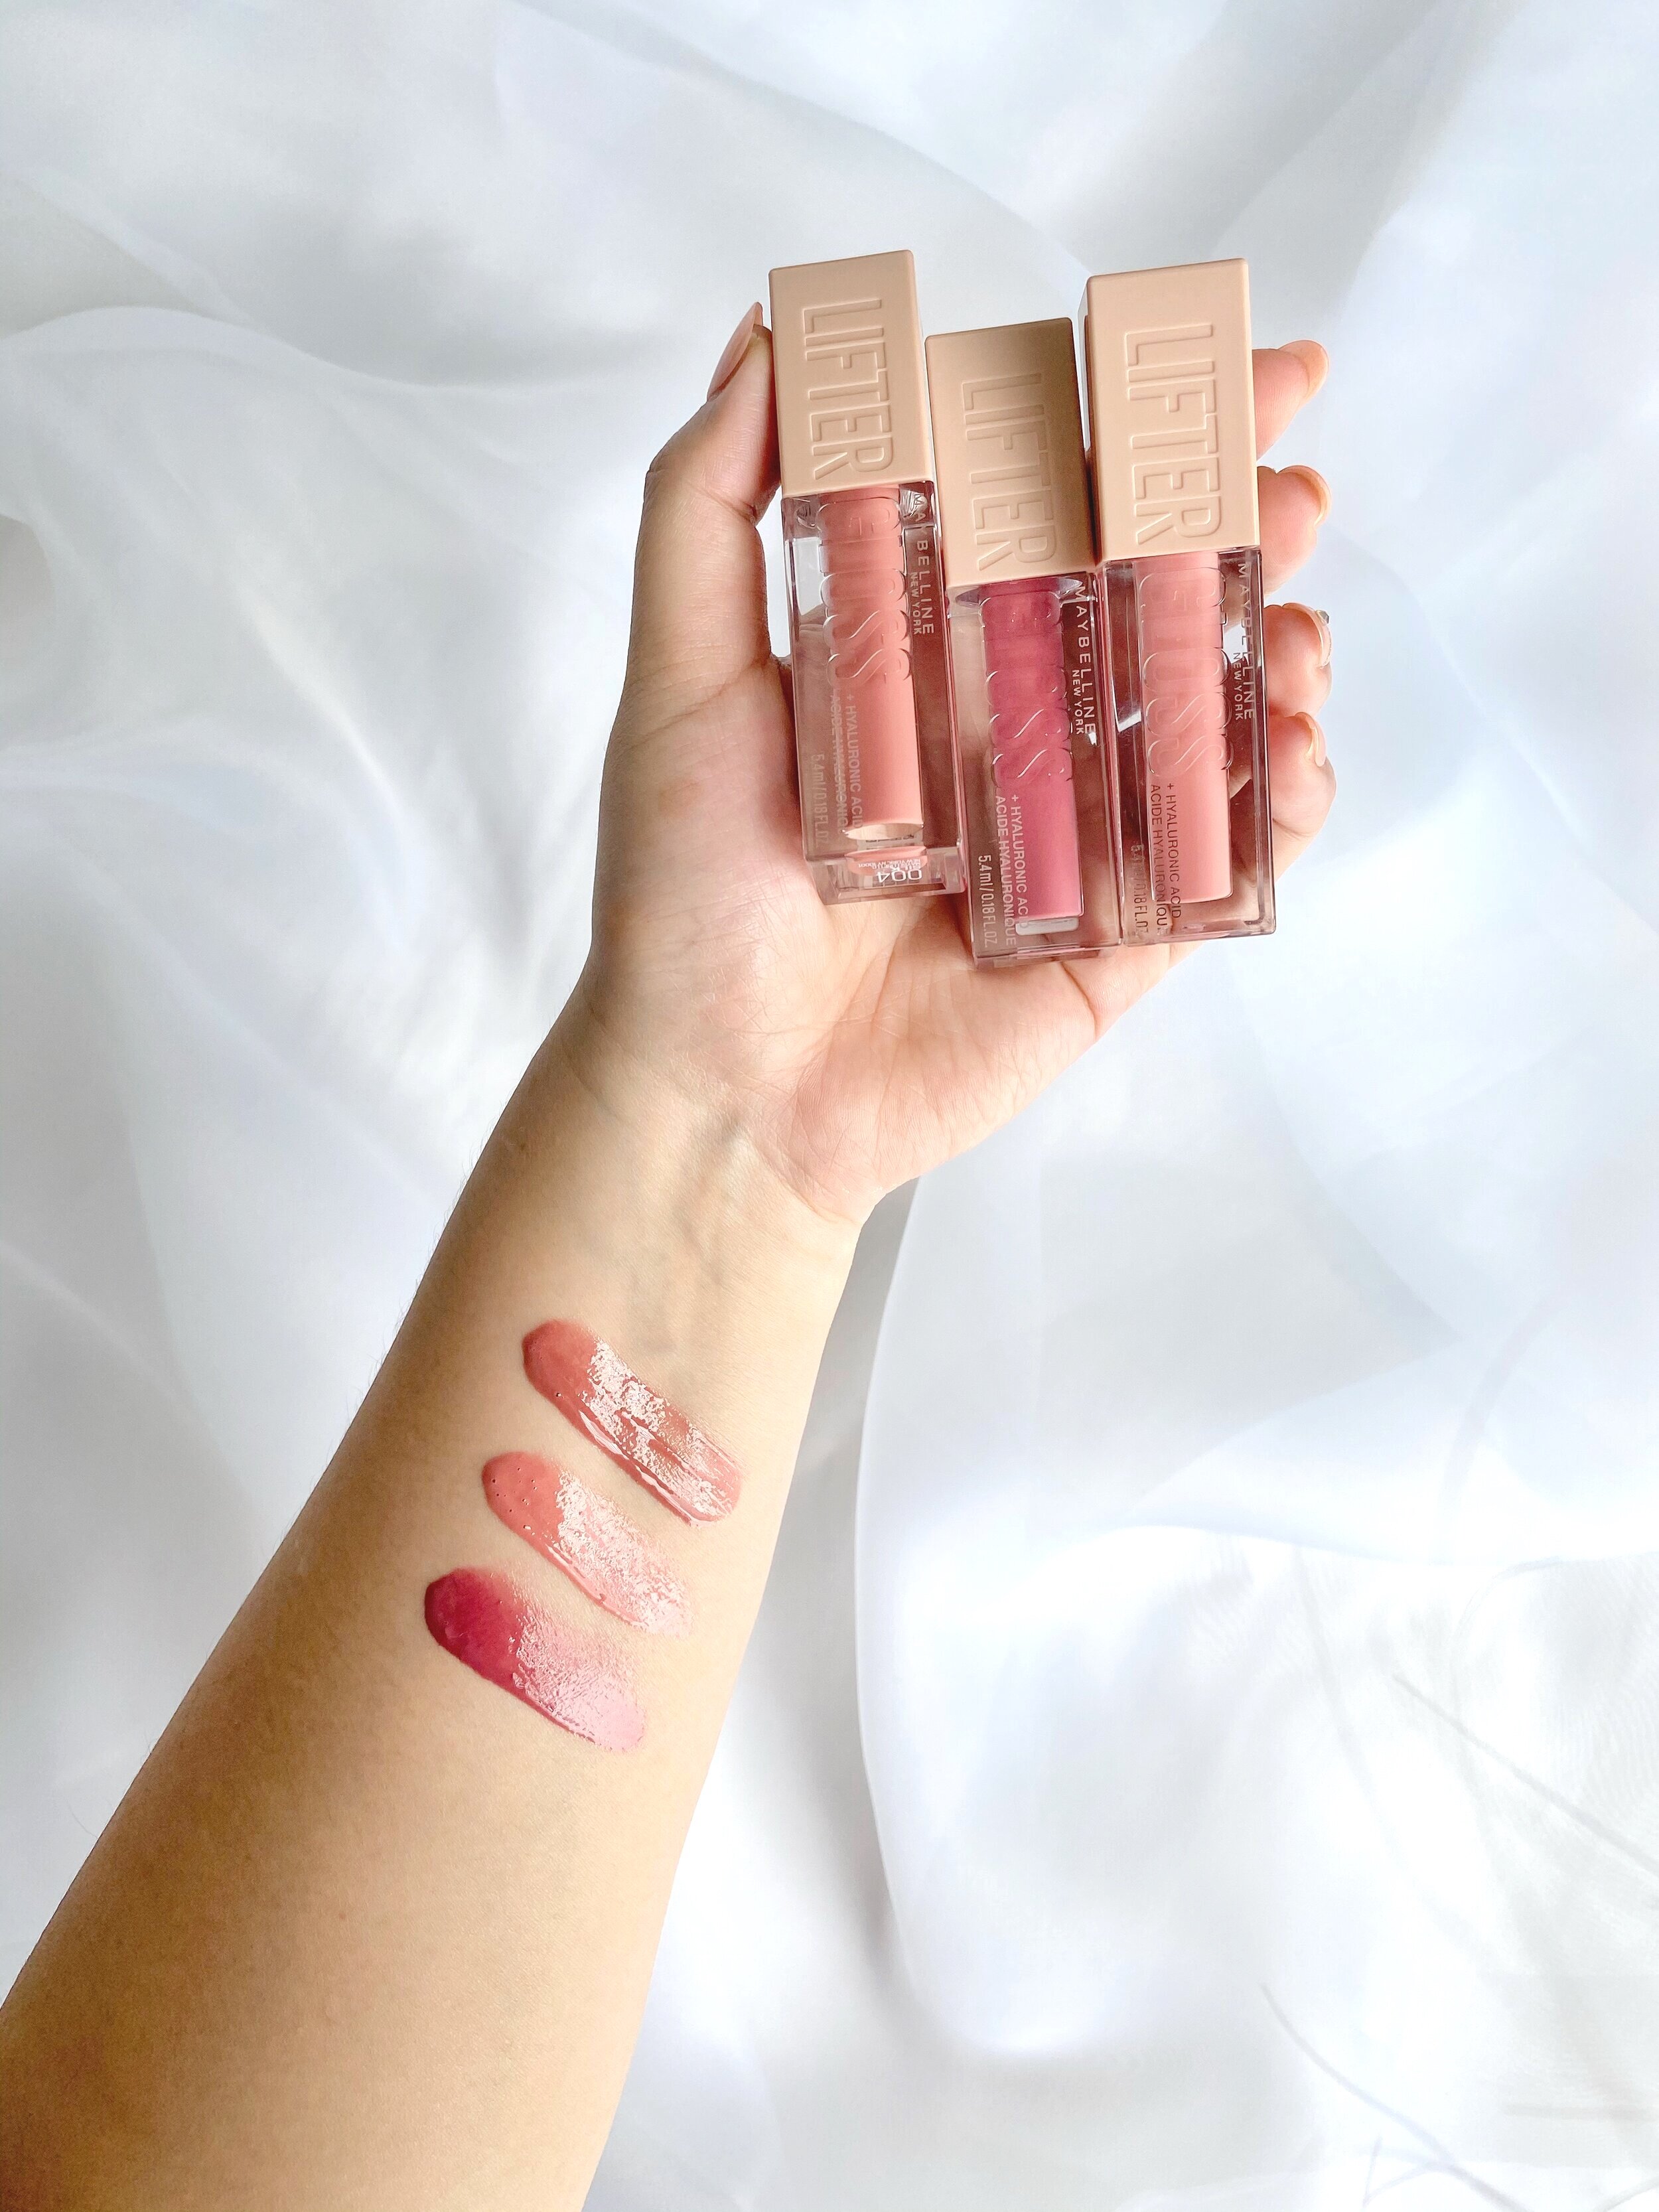 Maybelline Lifter Glosses A Dupe For Fenty Gloss Bombs The Reyna Edit